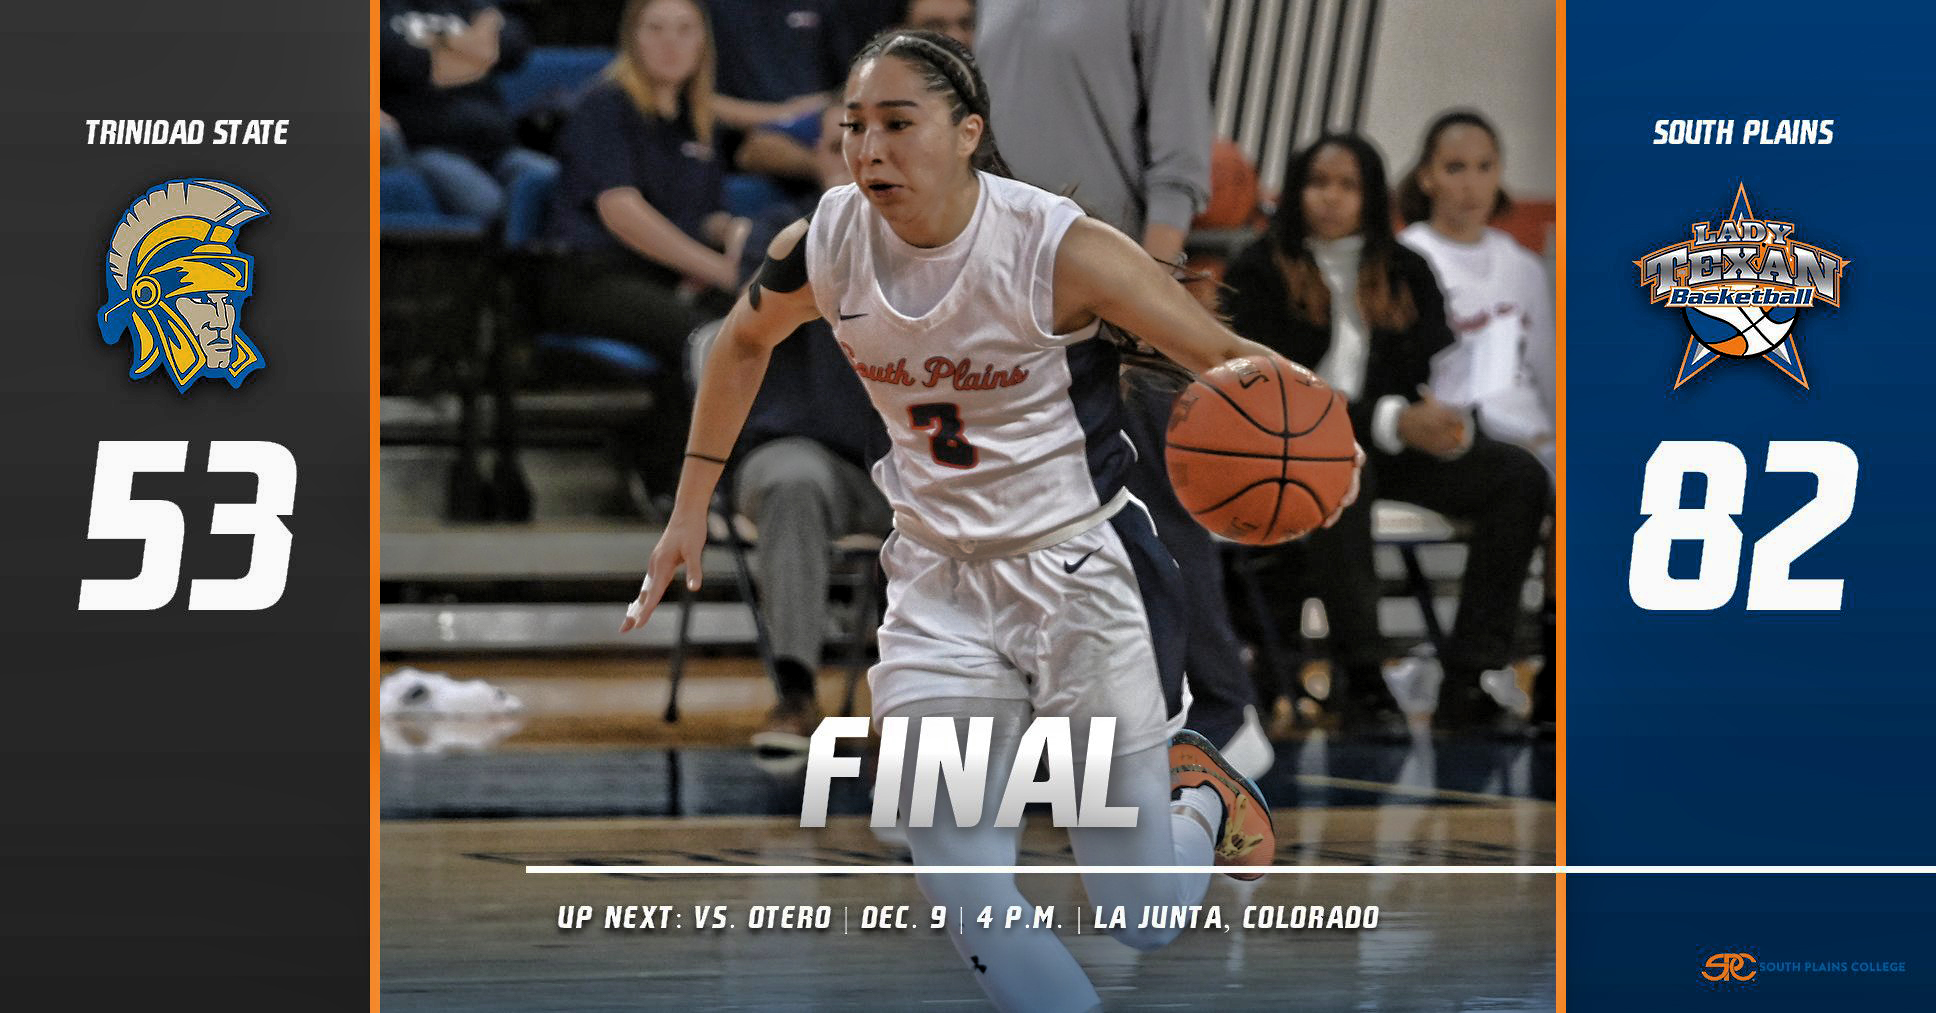 Balanced offensive attack leads Lady Texans past Trinidad State 82-53 Friday in Colorado